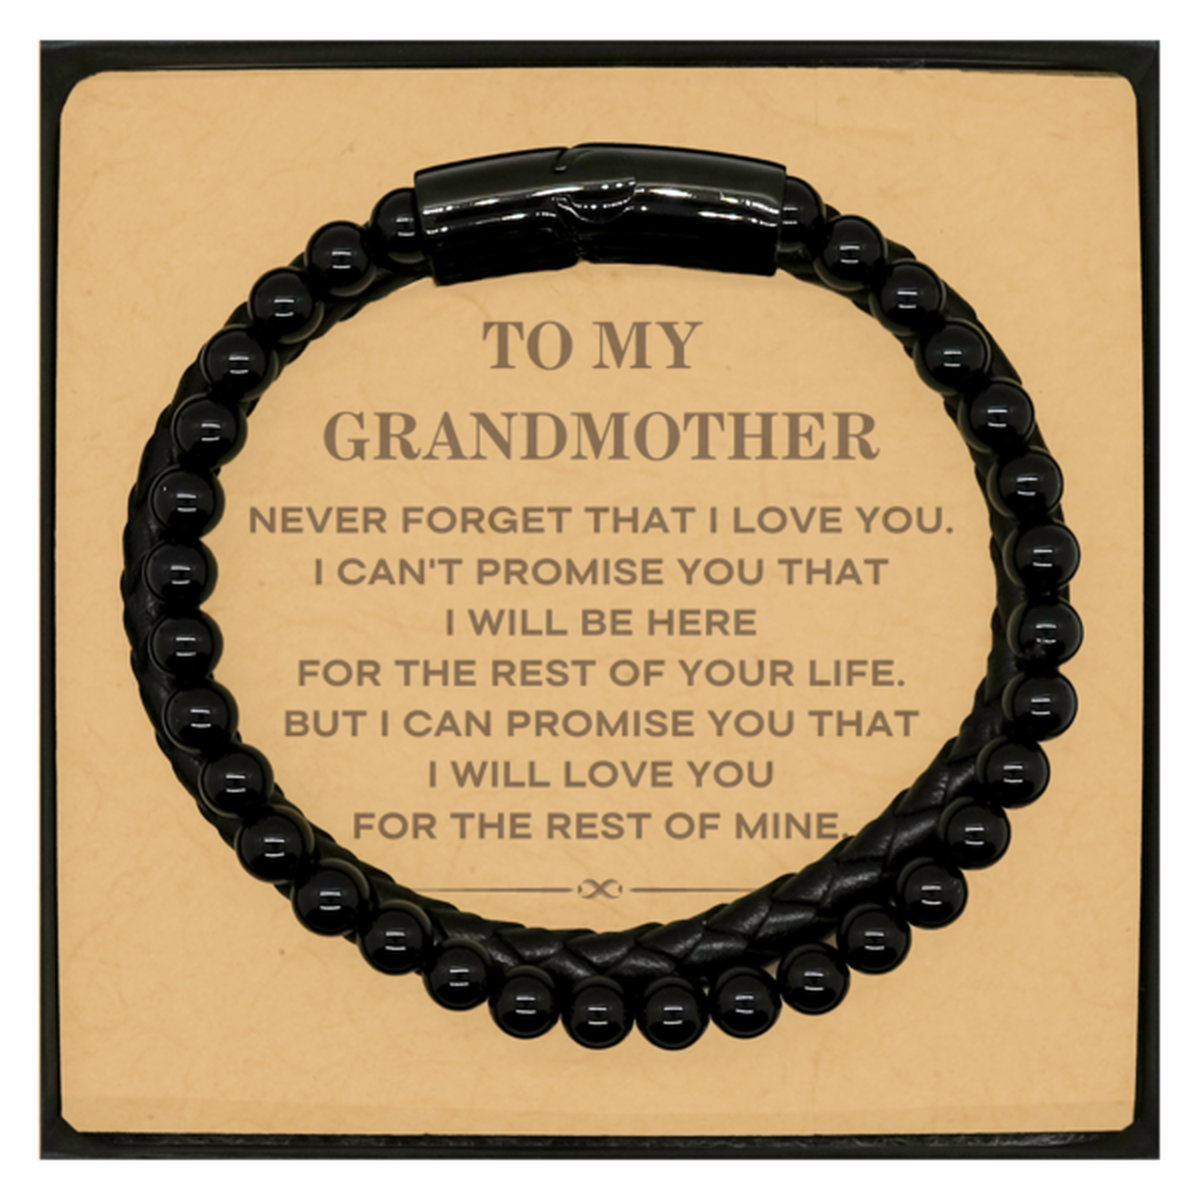 To My Grandmother Gifts, I will love you for the rest of mine, Love Grandmother Bracelet, Birthday Christmas Unique Stone Leather Bracelets For Grandmother